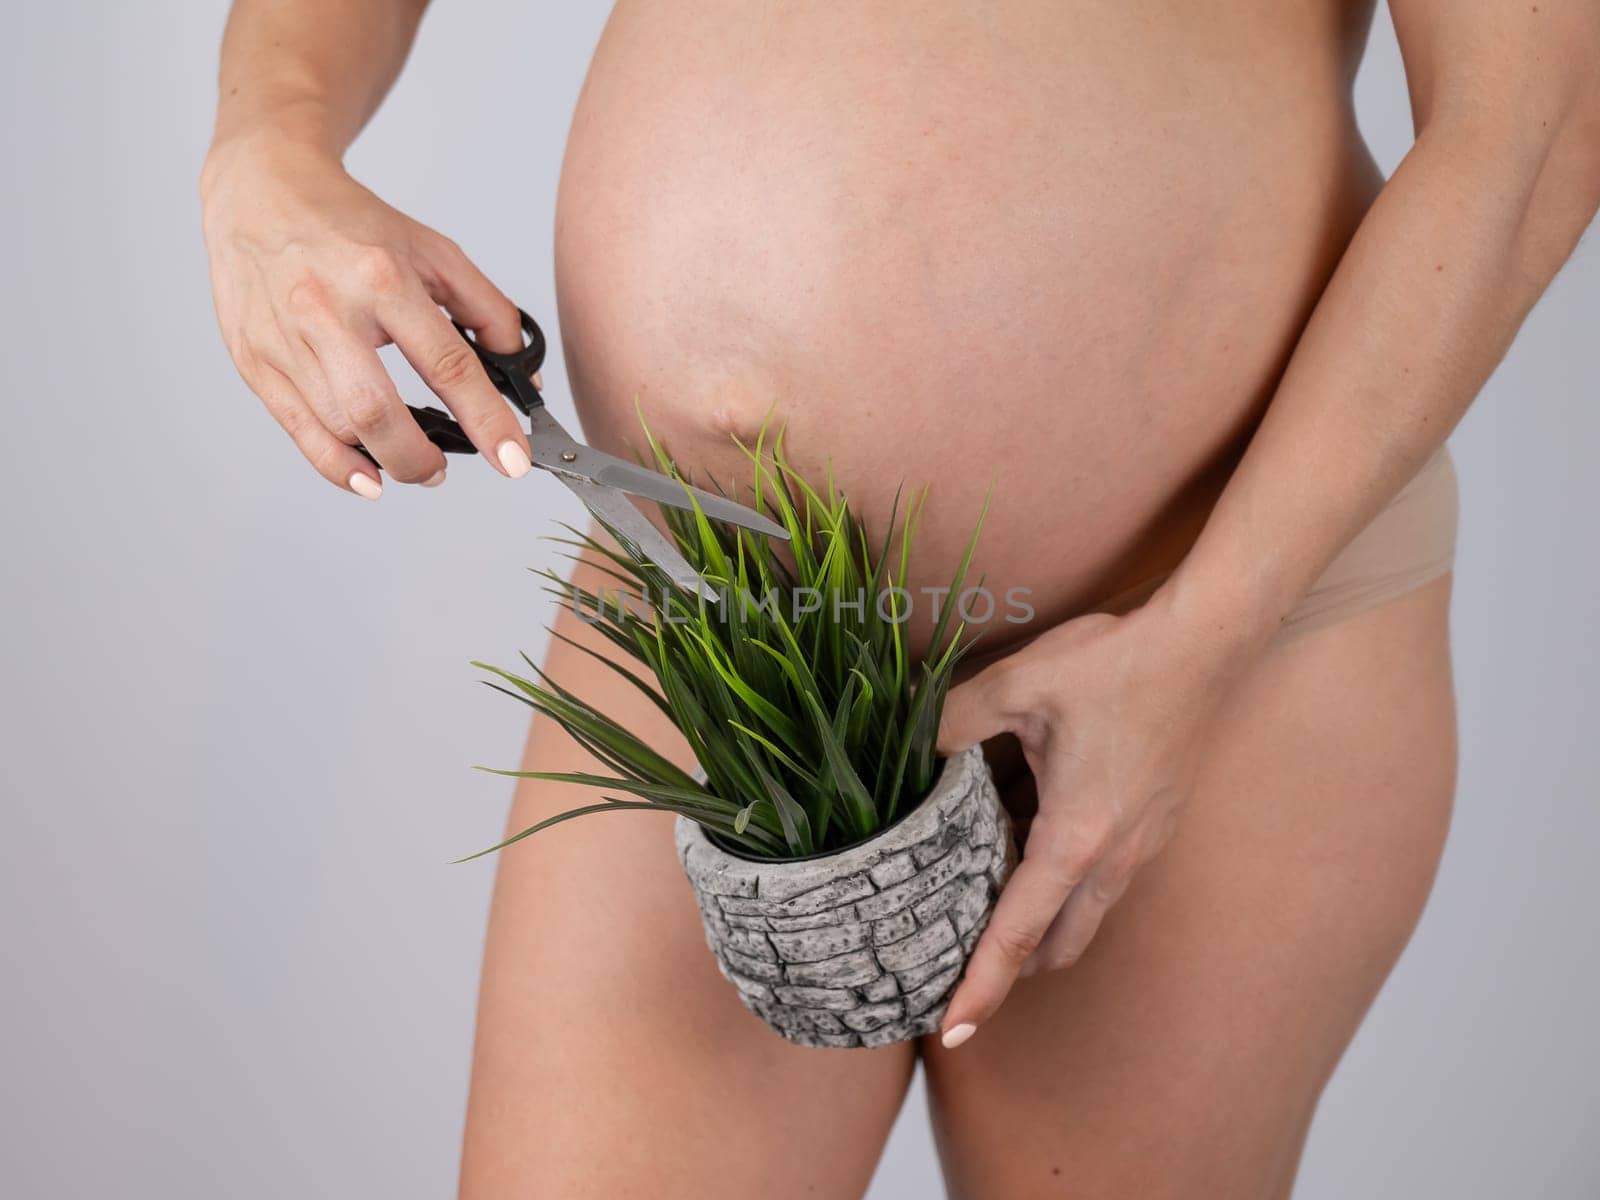 A faceless pregnant woman cuts a plant with scissors. Metaphor for epilation of the bikini area